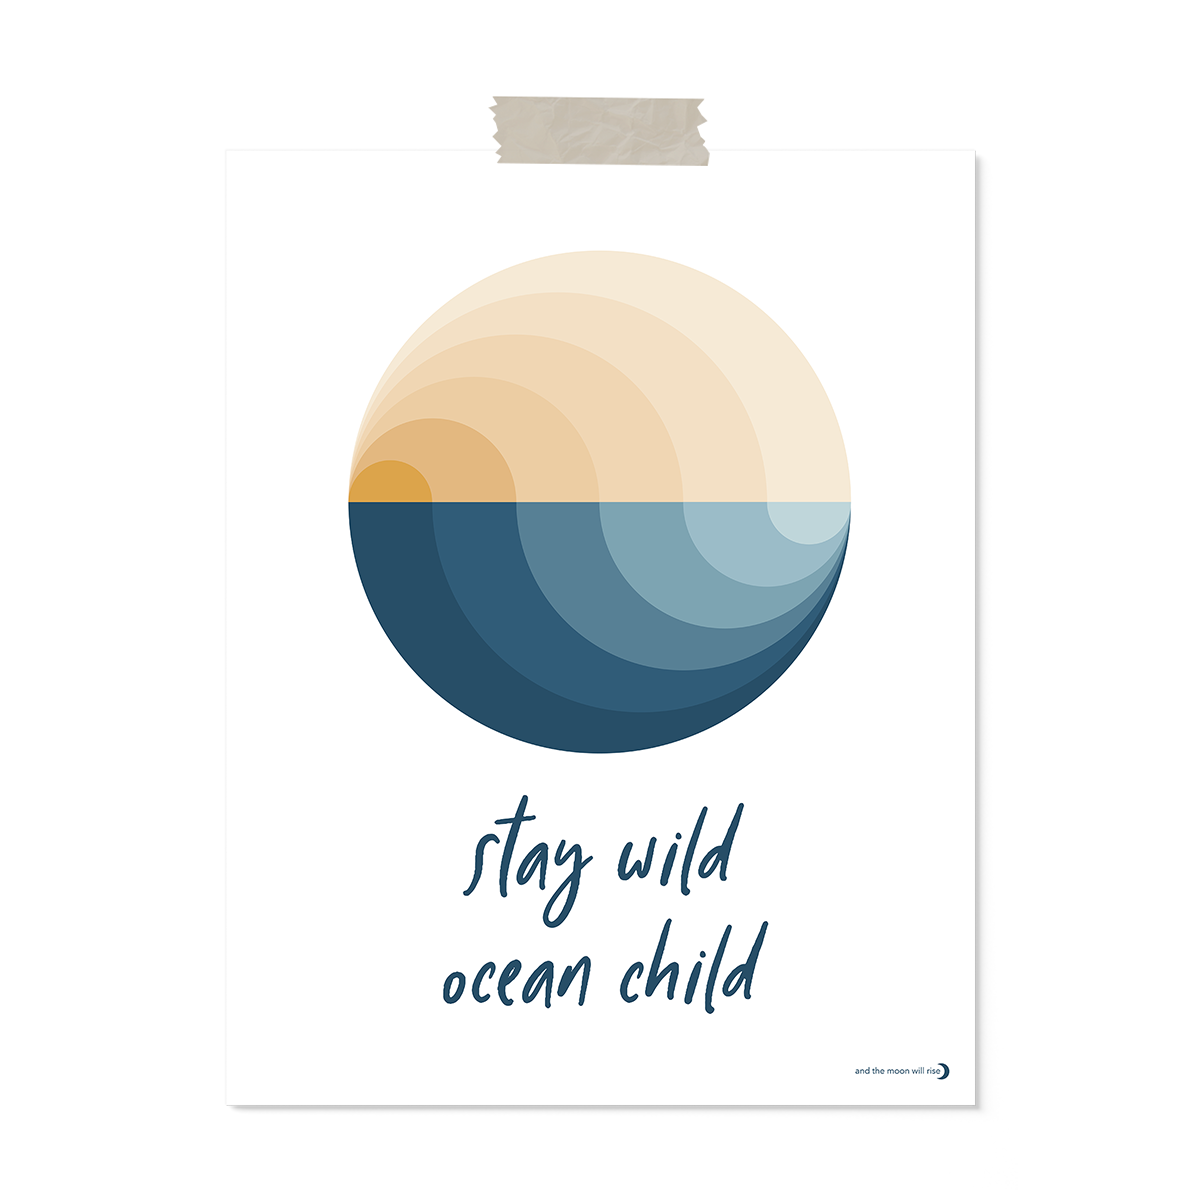 11x14" vertical art print "stay wild ocean child" in handwritten navy font and concentric circles of gold and blue mimicking a sunset on the ocean on white background